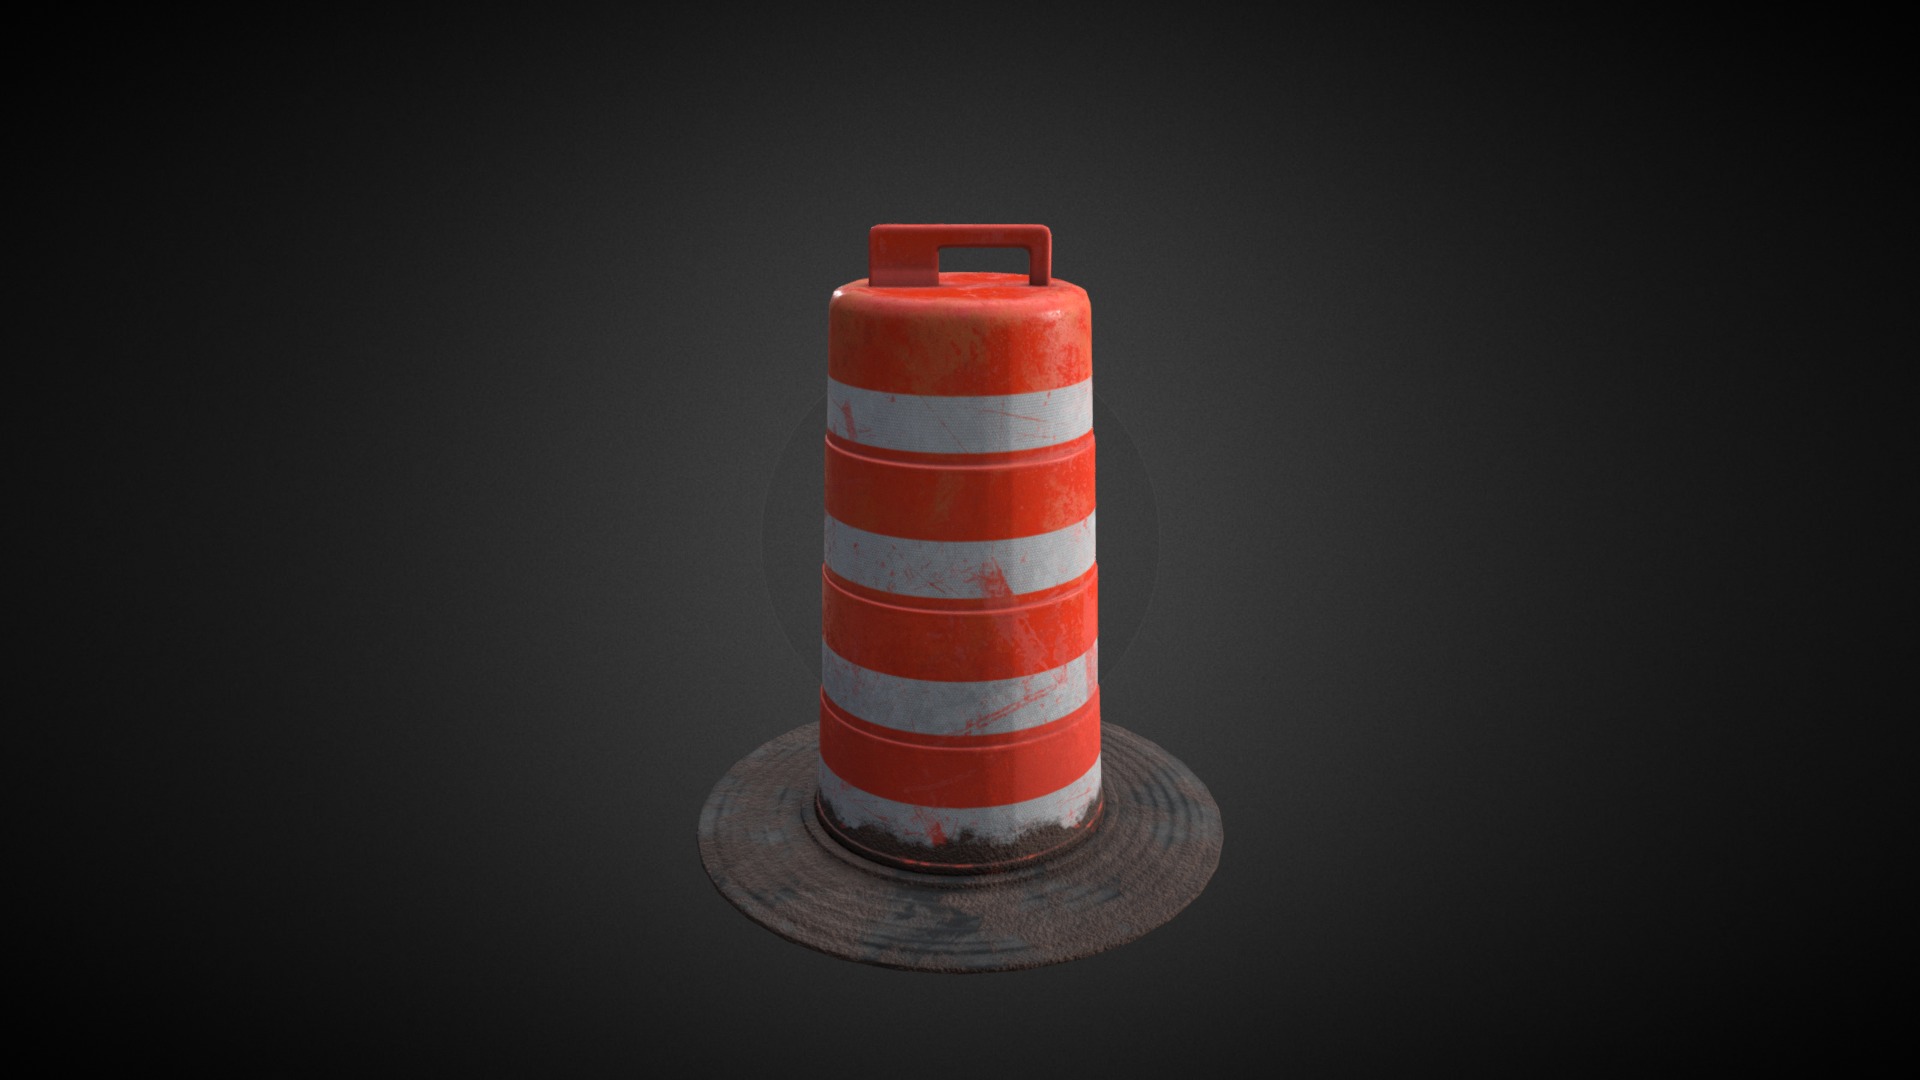 3D model Construction Pylon - This is a 3D model of the Construction Pylon. The 3D model is about a stack of orange and white cones.